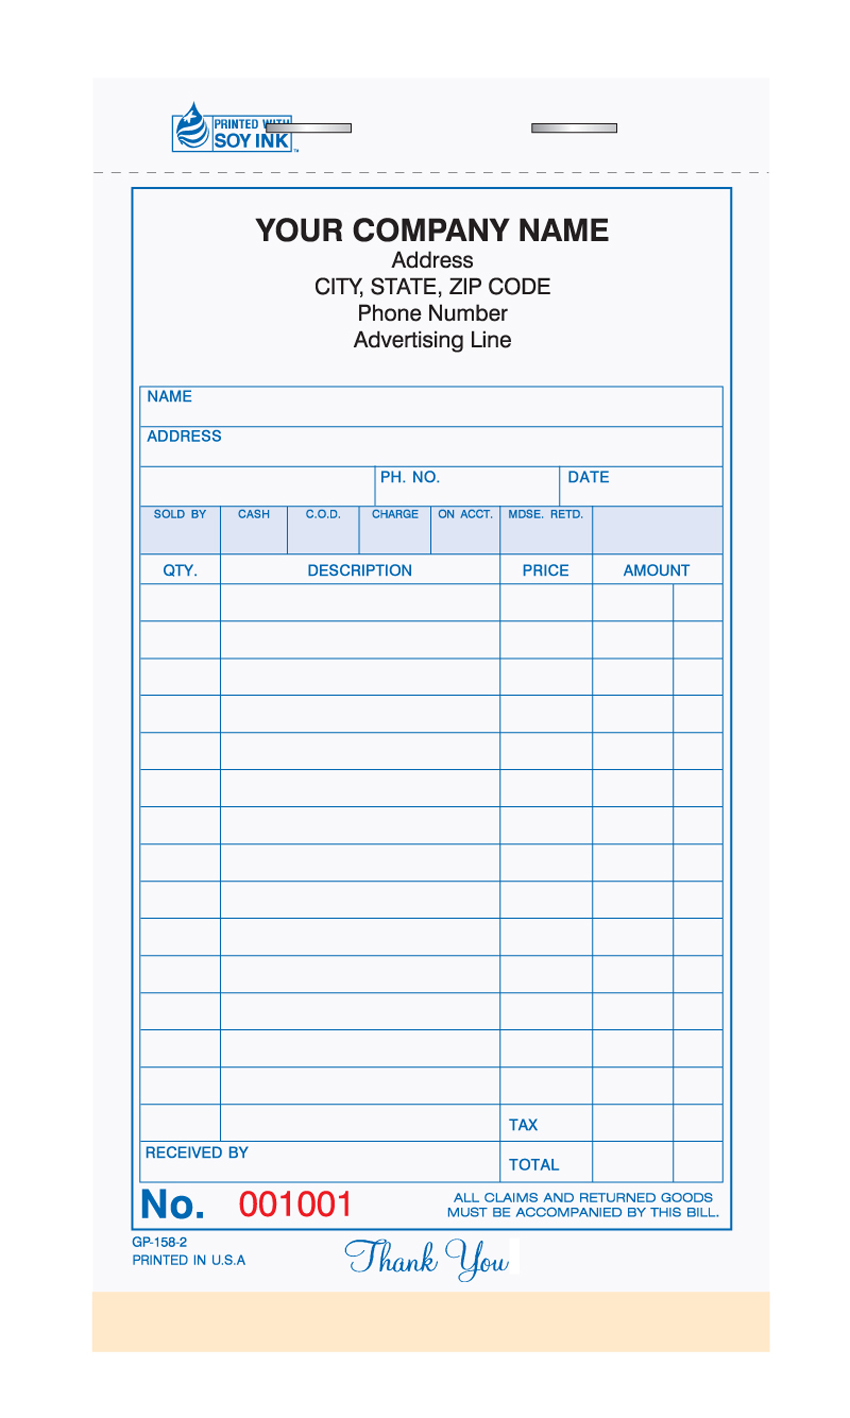 General Sales Booked Form - GP-158-3 Part - 4.25 x 7